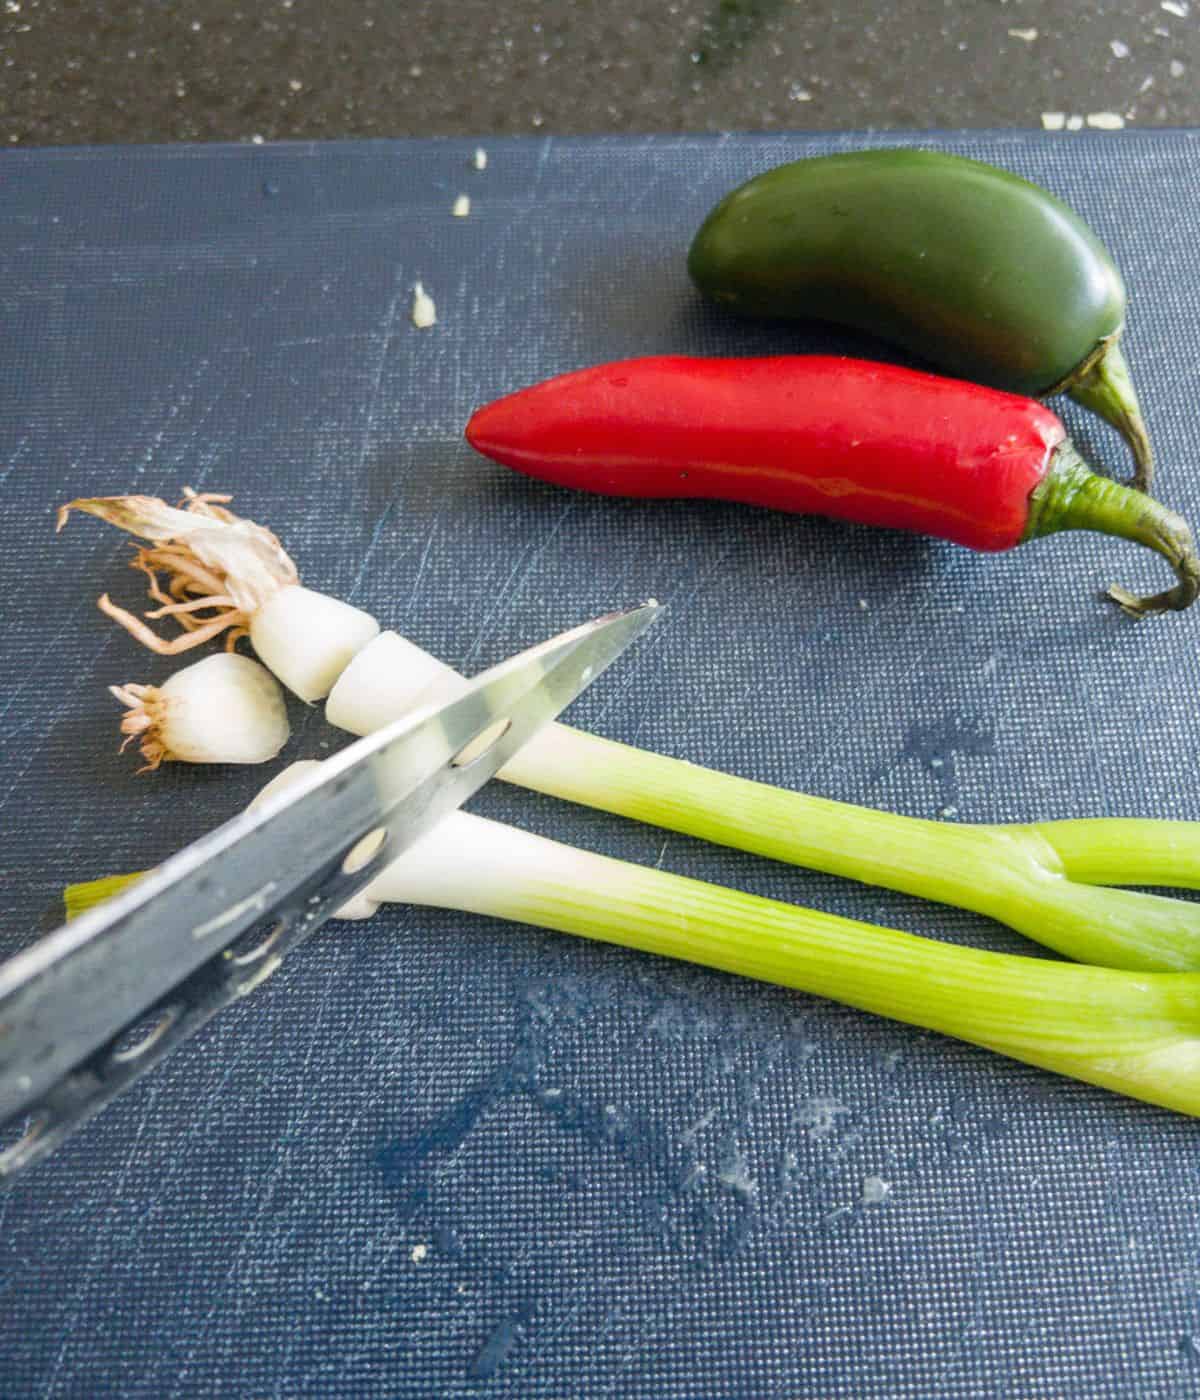 chillis and spring onions being cut with a knife on a blue chopping board